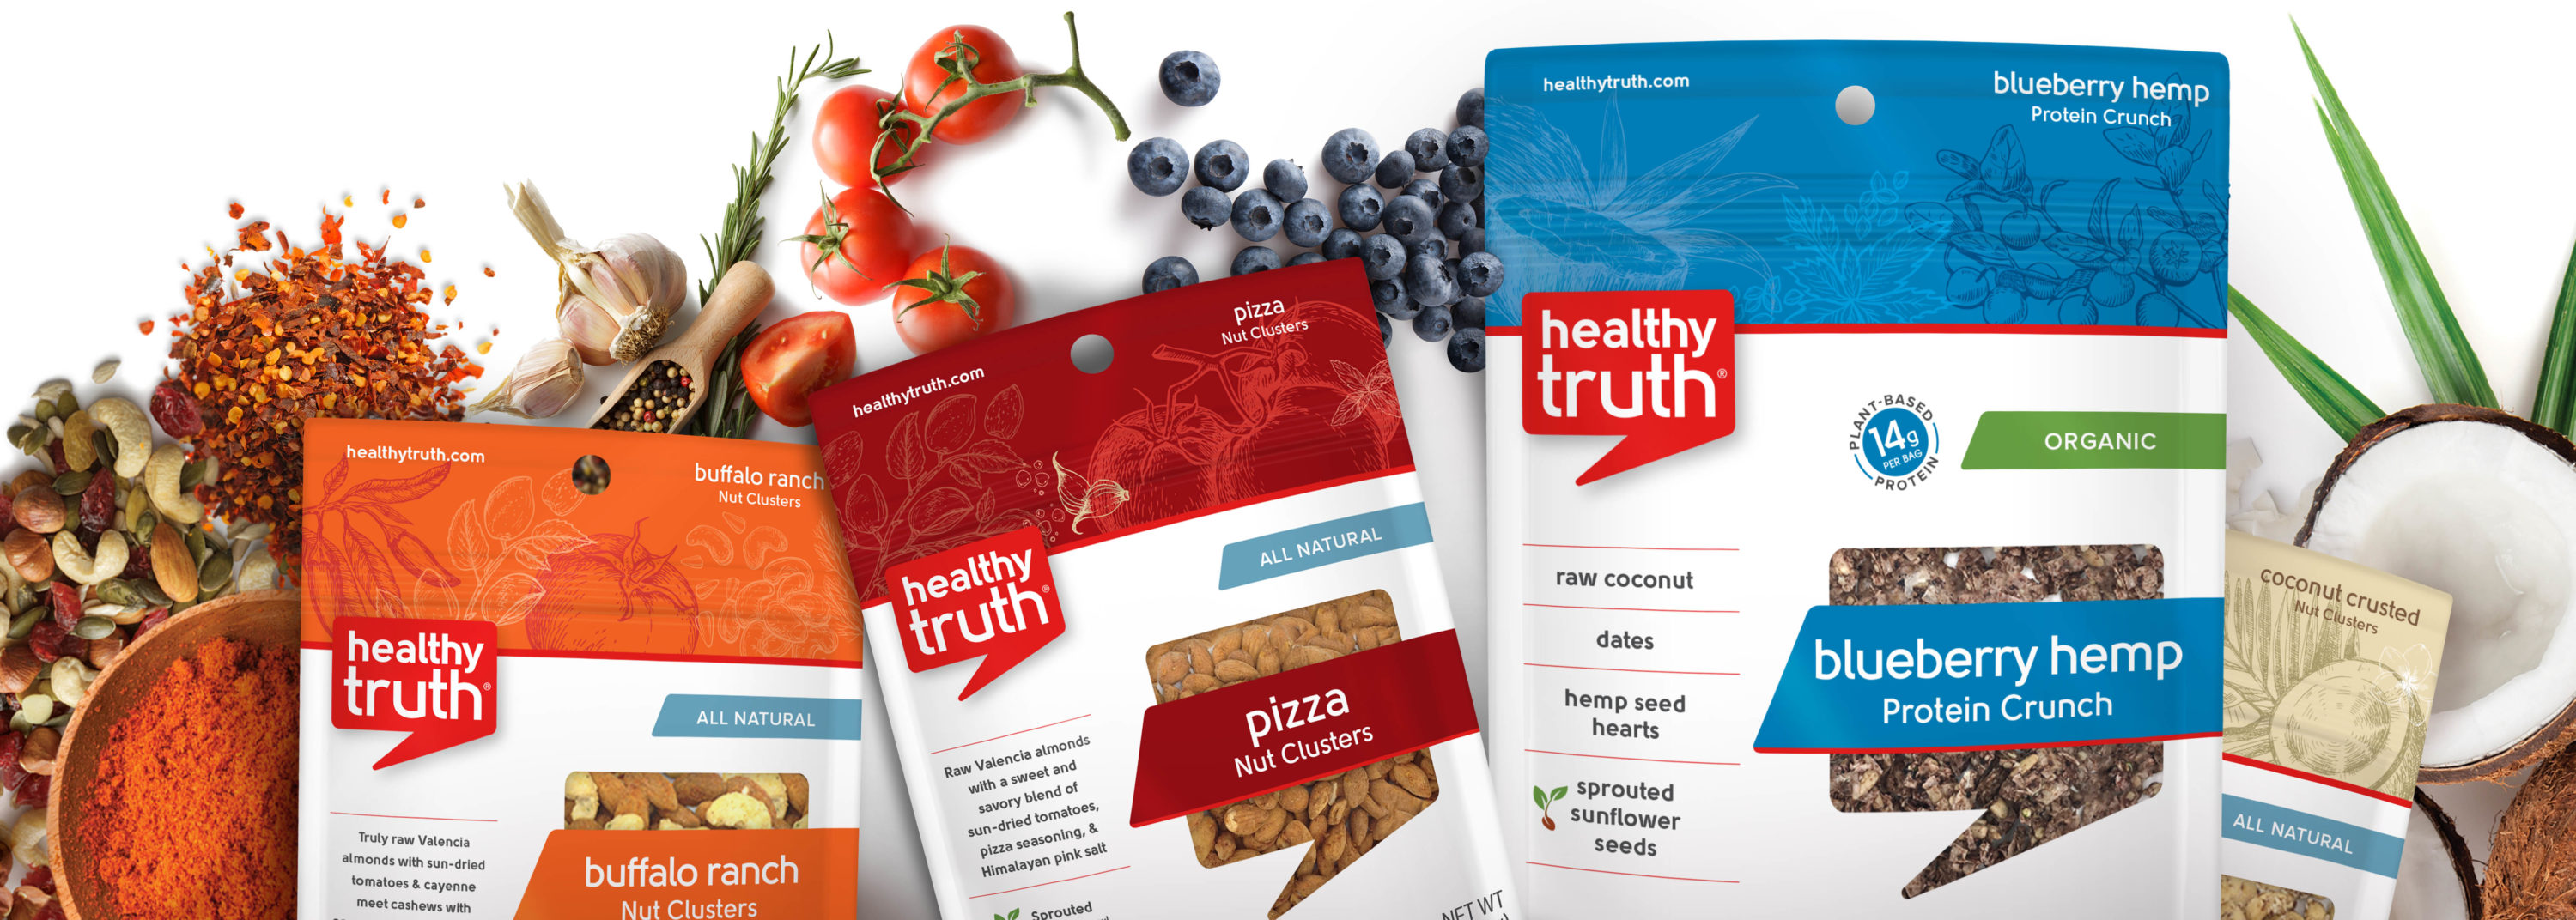 Healthy Truth packaging with fruit in background